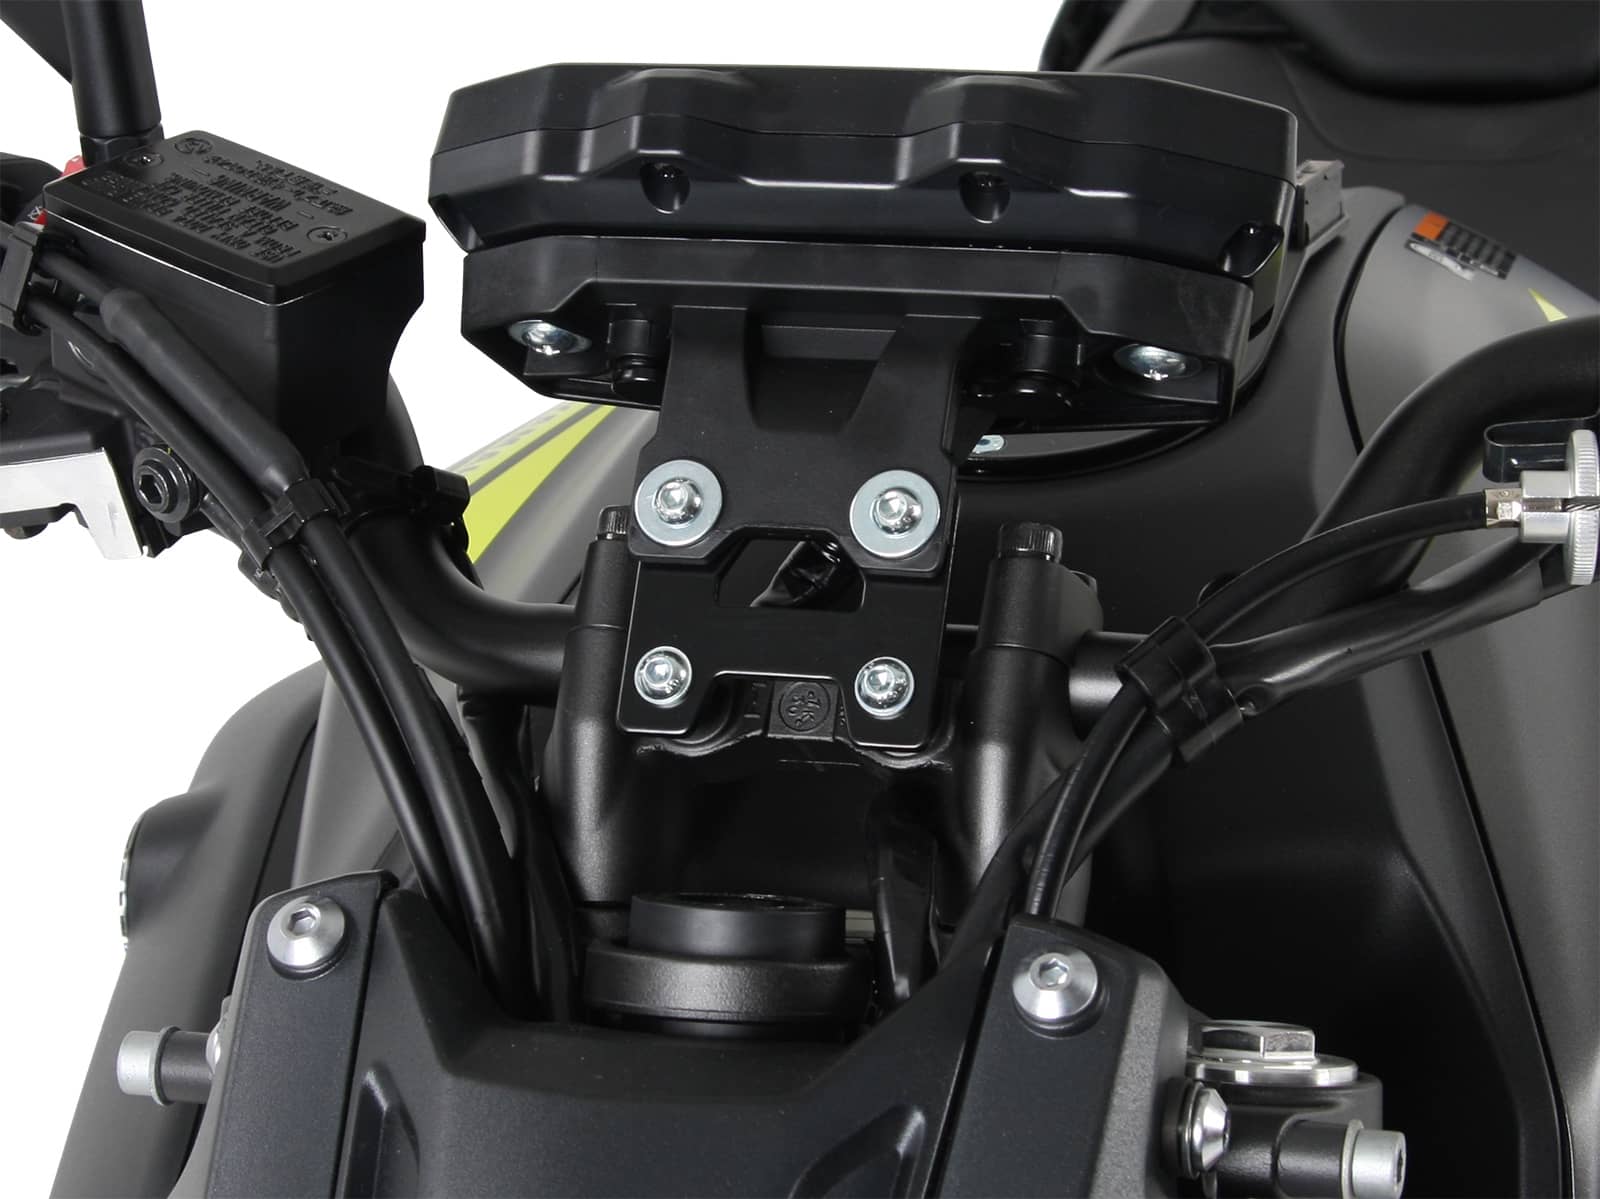 Instrument panel moving for Yamaha MT-07 (2018-2020)